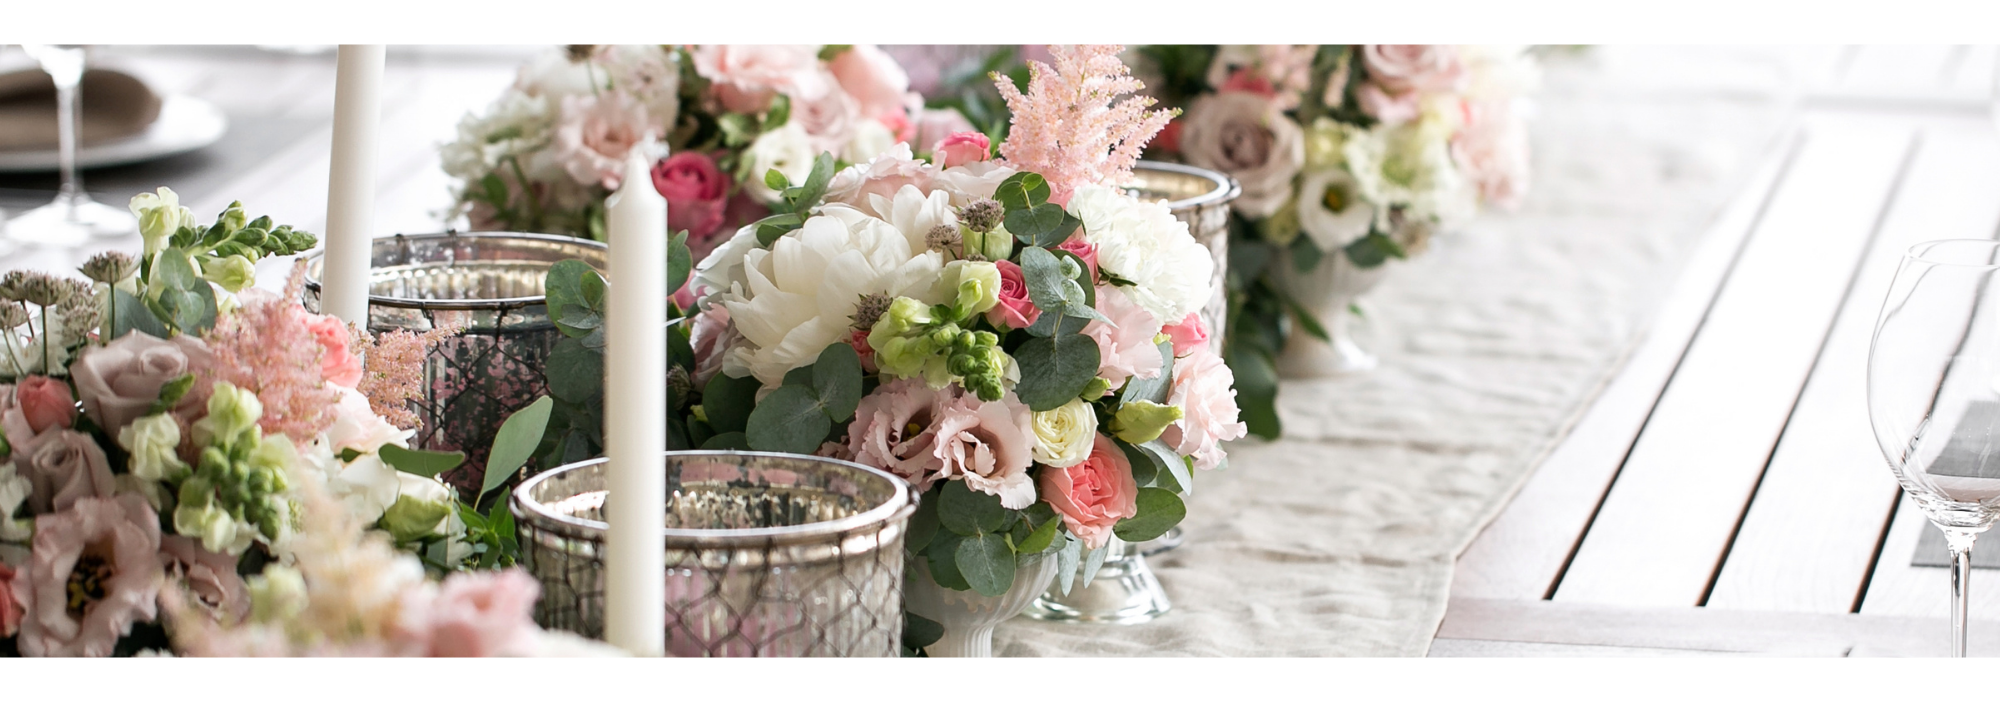 pink and white rose floral centerpieces with soft greenery 